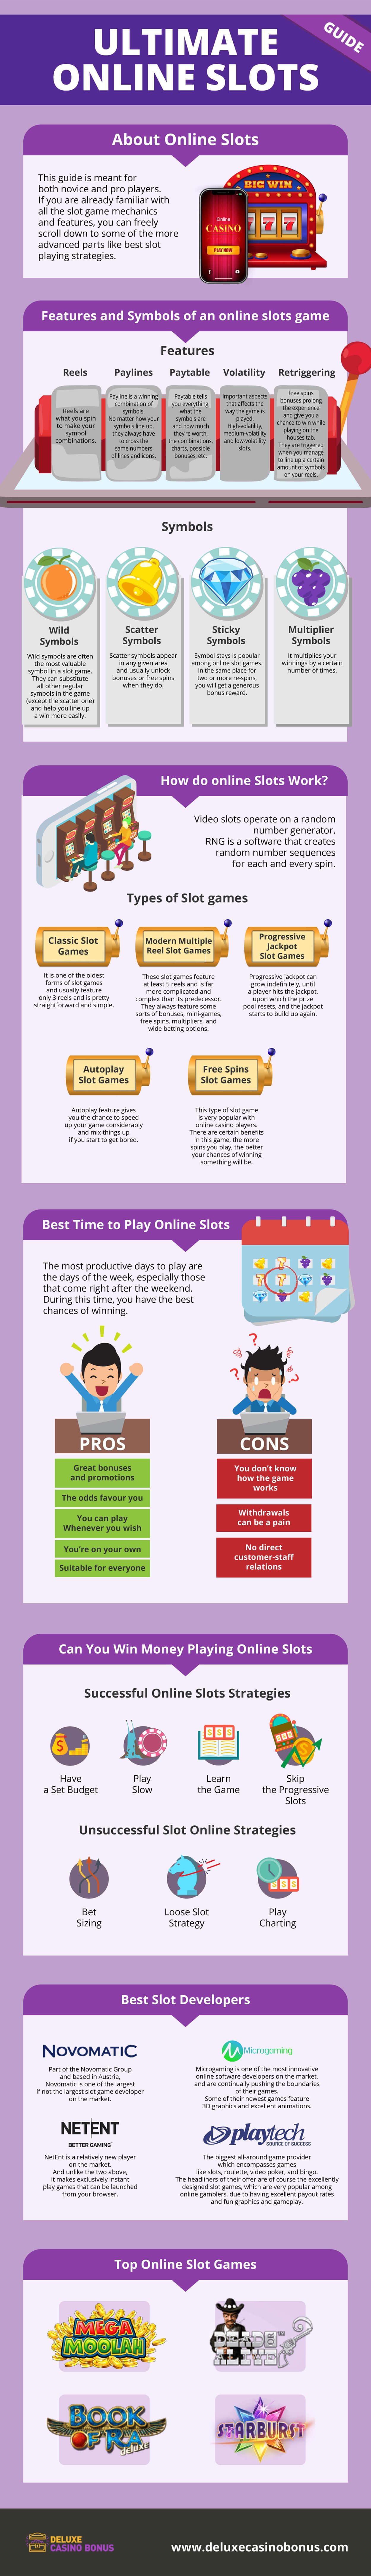 Ultimate Online Slots Guide from Deluxe Casino Bonus-infographic-plaza